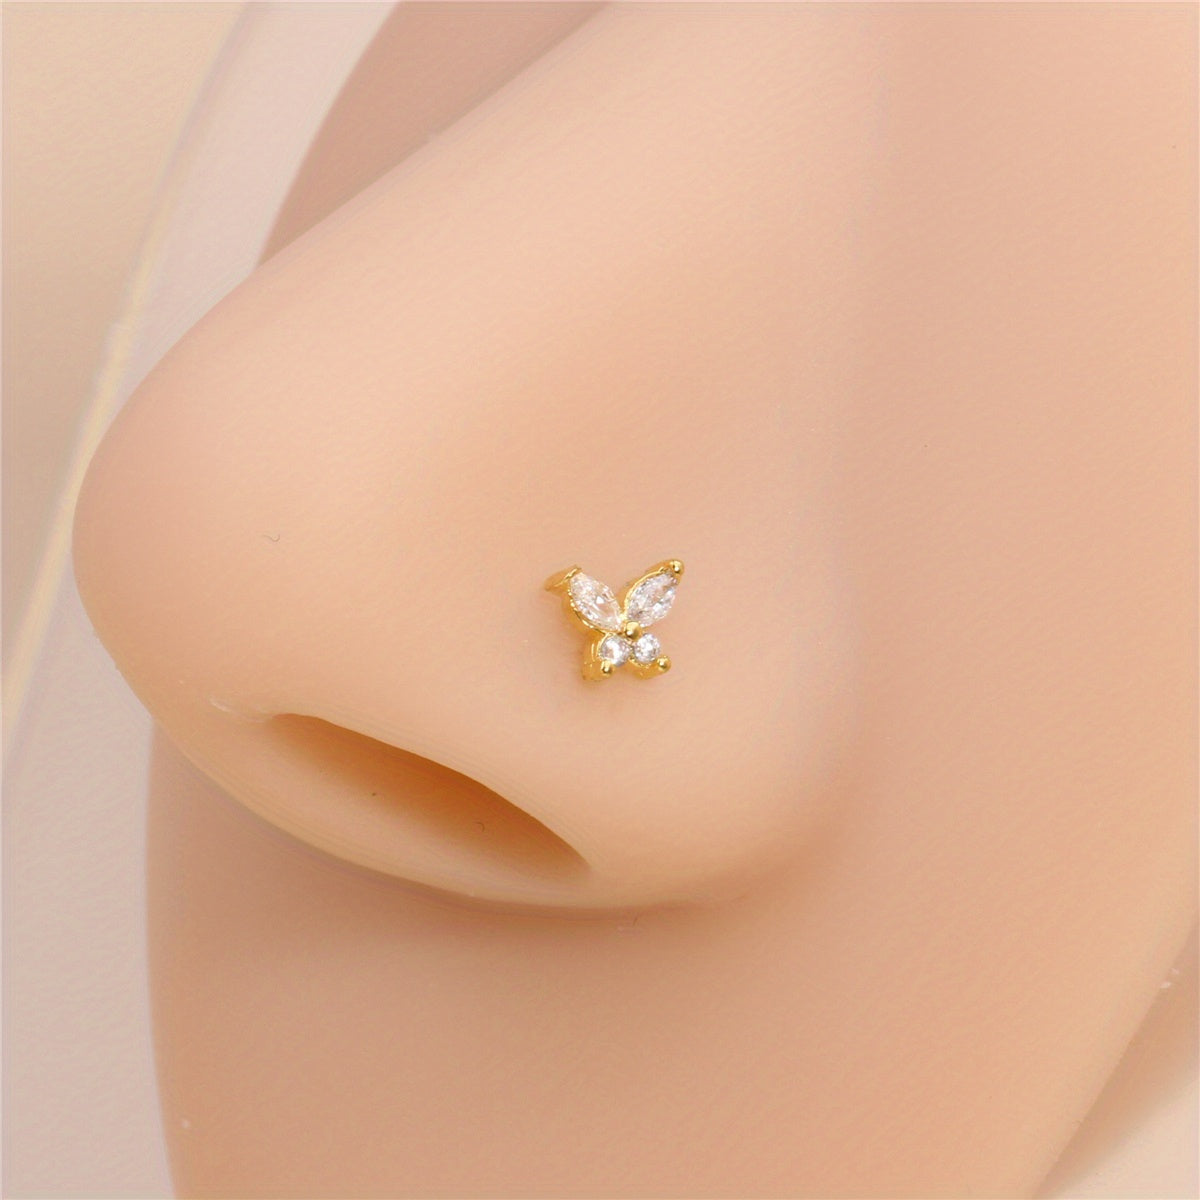 L Shaped Nose Studs Butterfly Screw Nose Rings Stud For Women Men Nose Piercing